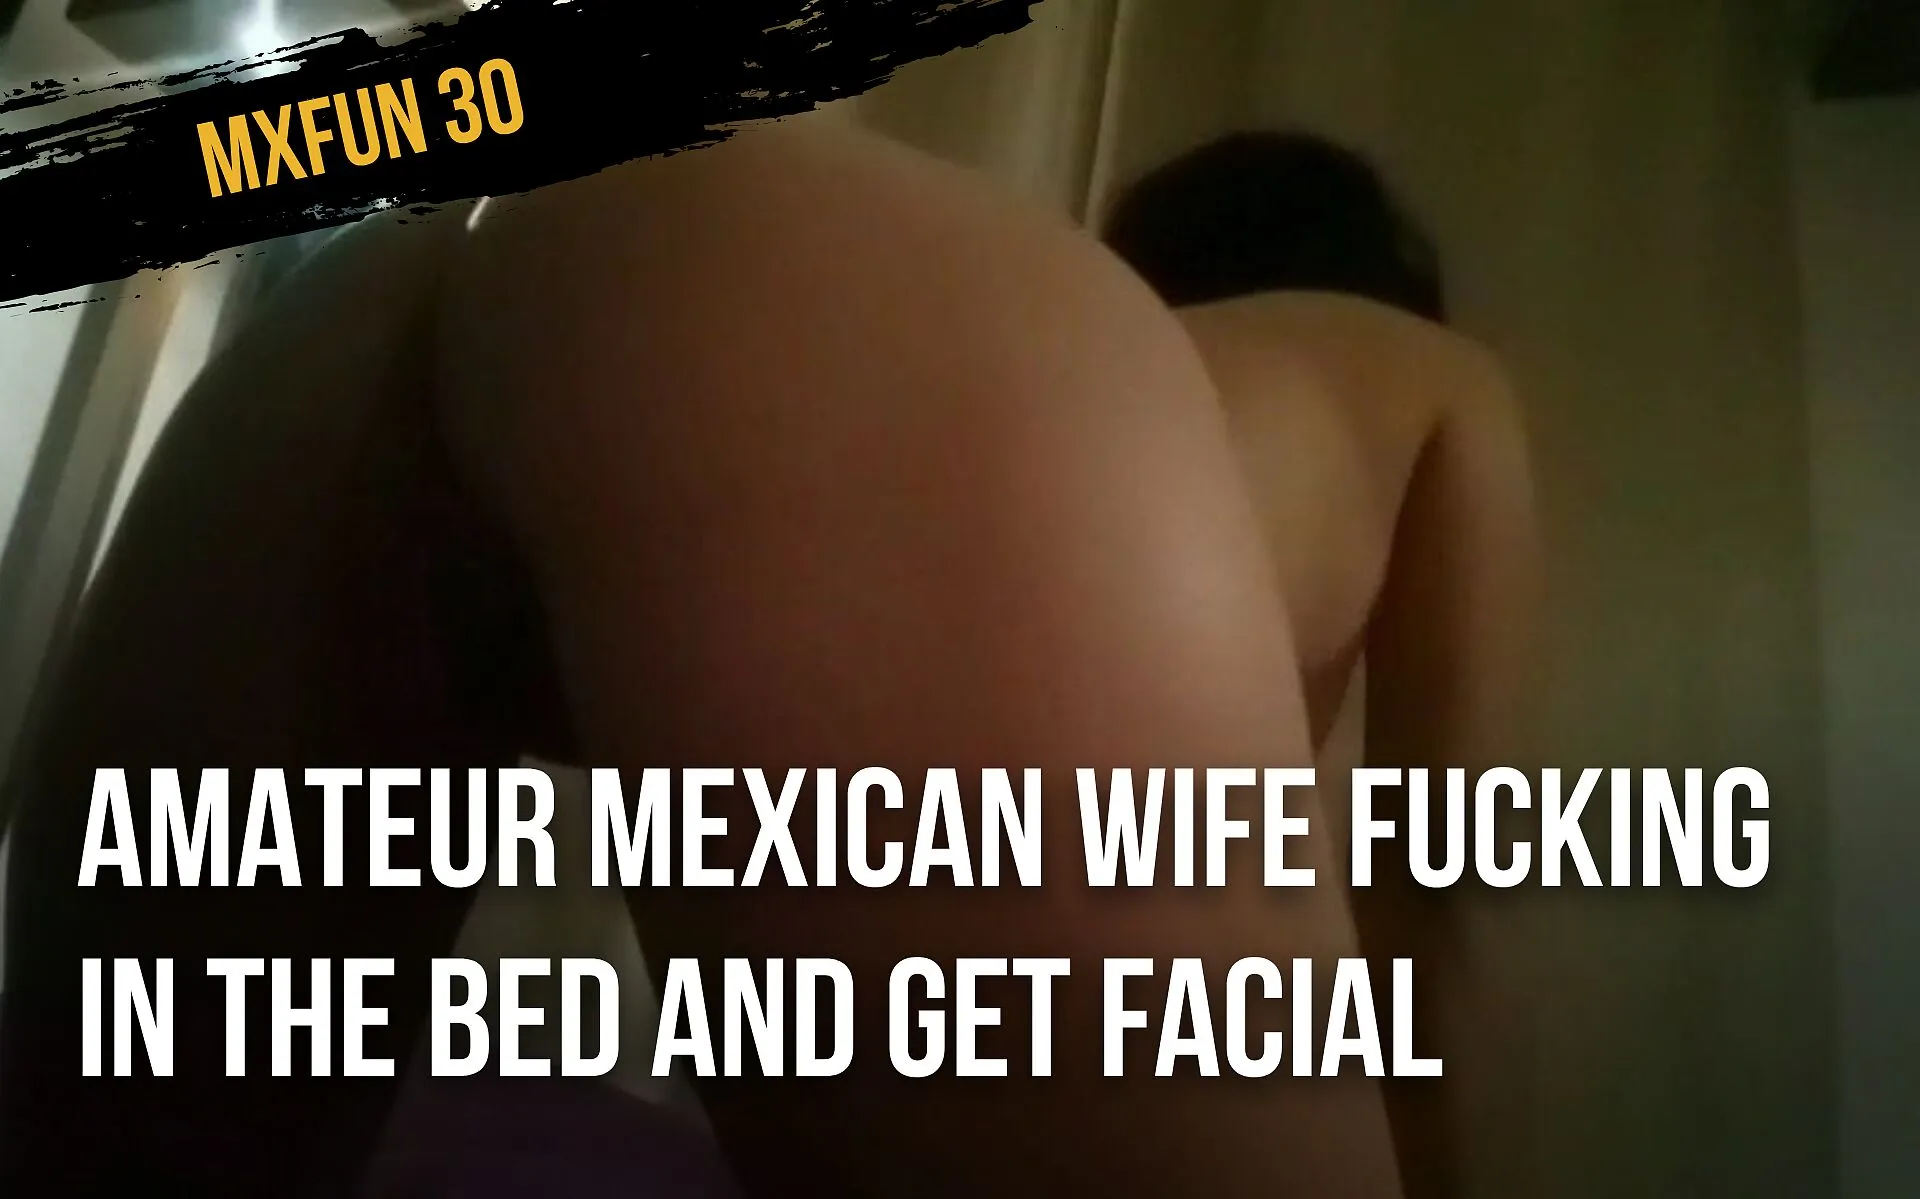 Amateur Mexican wife fucking in the bed and get facial by Mxfun 30 Faphouse